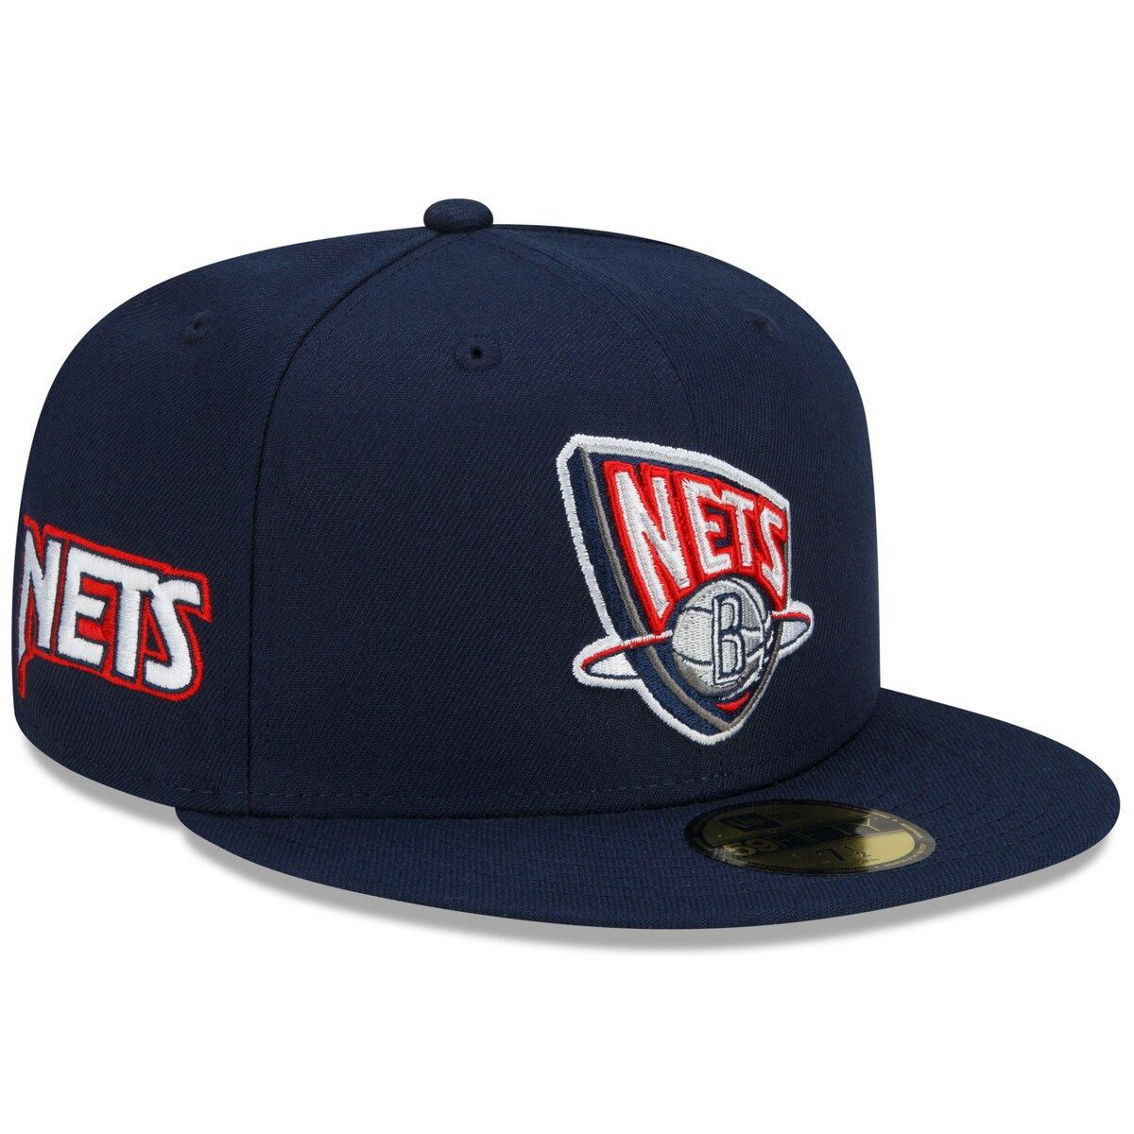 New Era Men's Navy Brooklyn Nets 2021/22 City Edition Alternate 59FIFTY Fitted Hat - Image 4 of 4